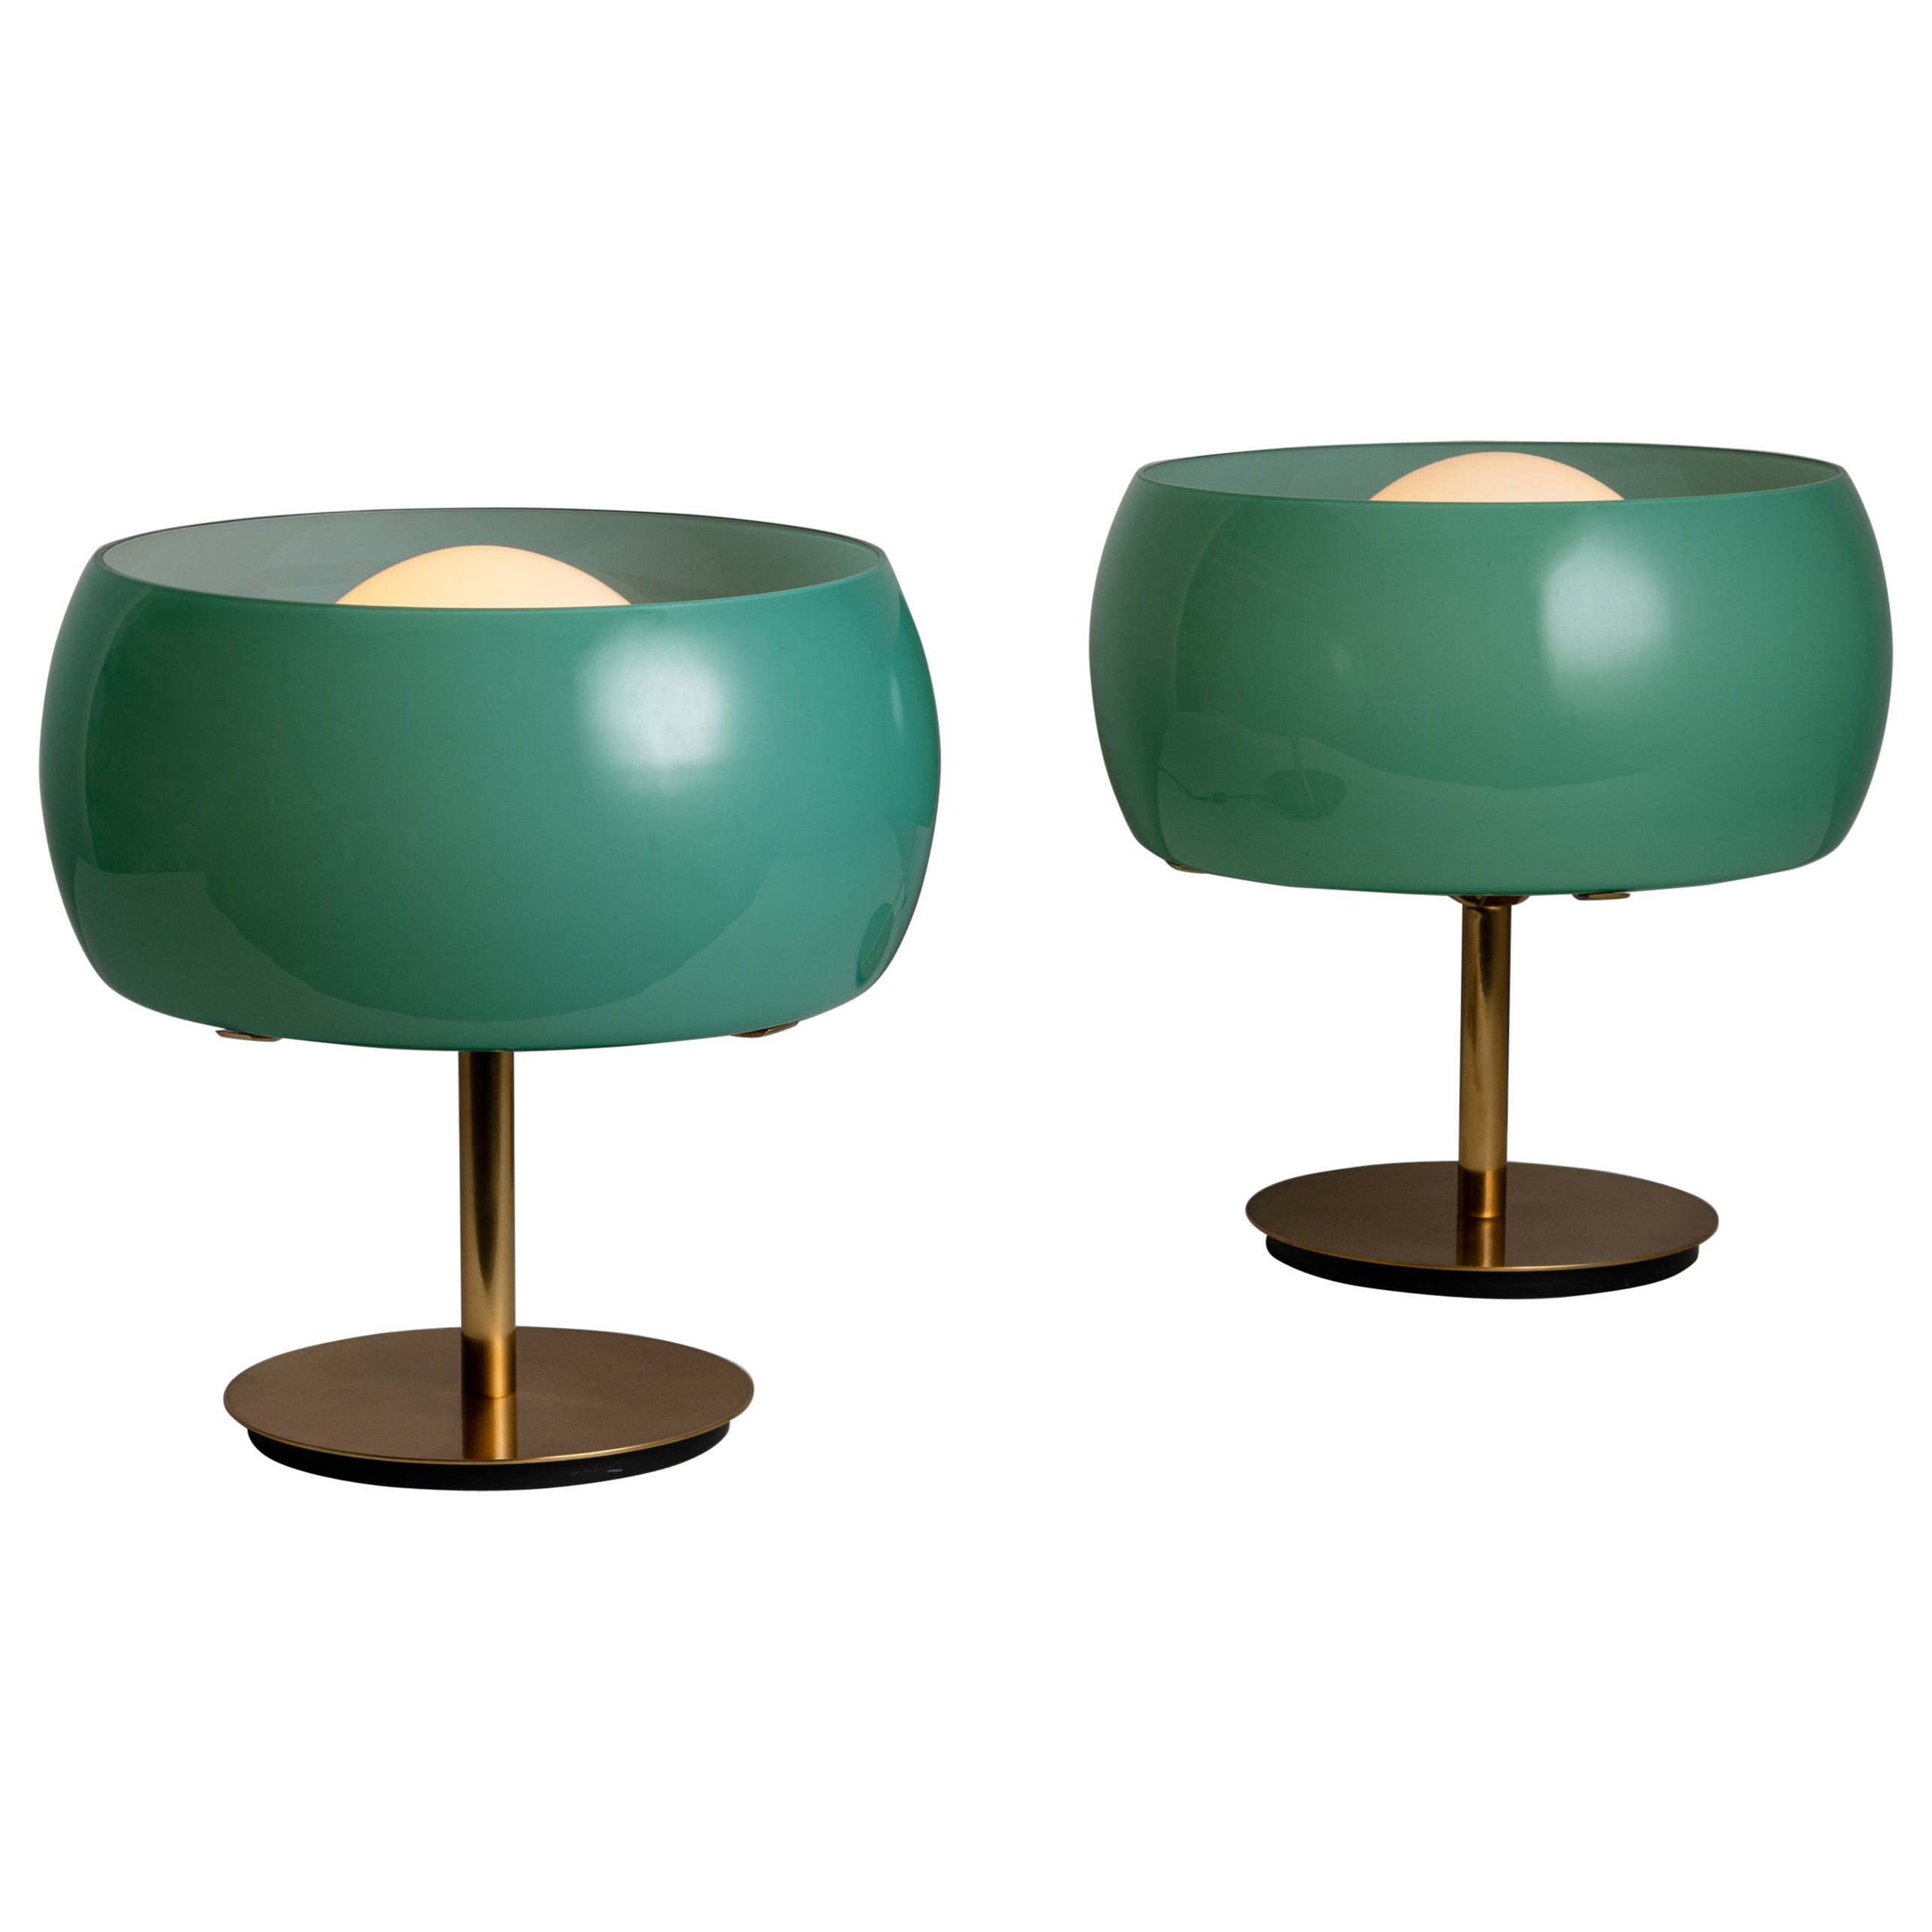 Rare Pair of 'Erse' Table Lamps by Vico Magistretti for Artemide